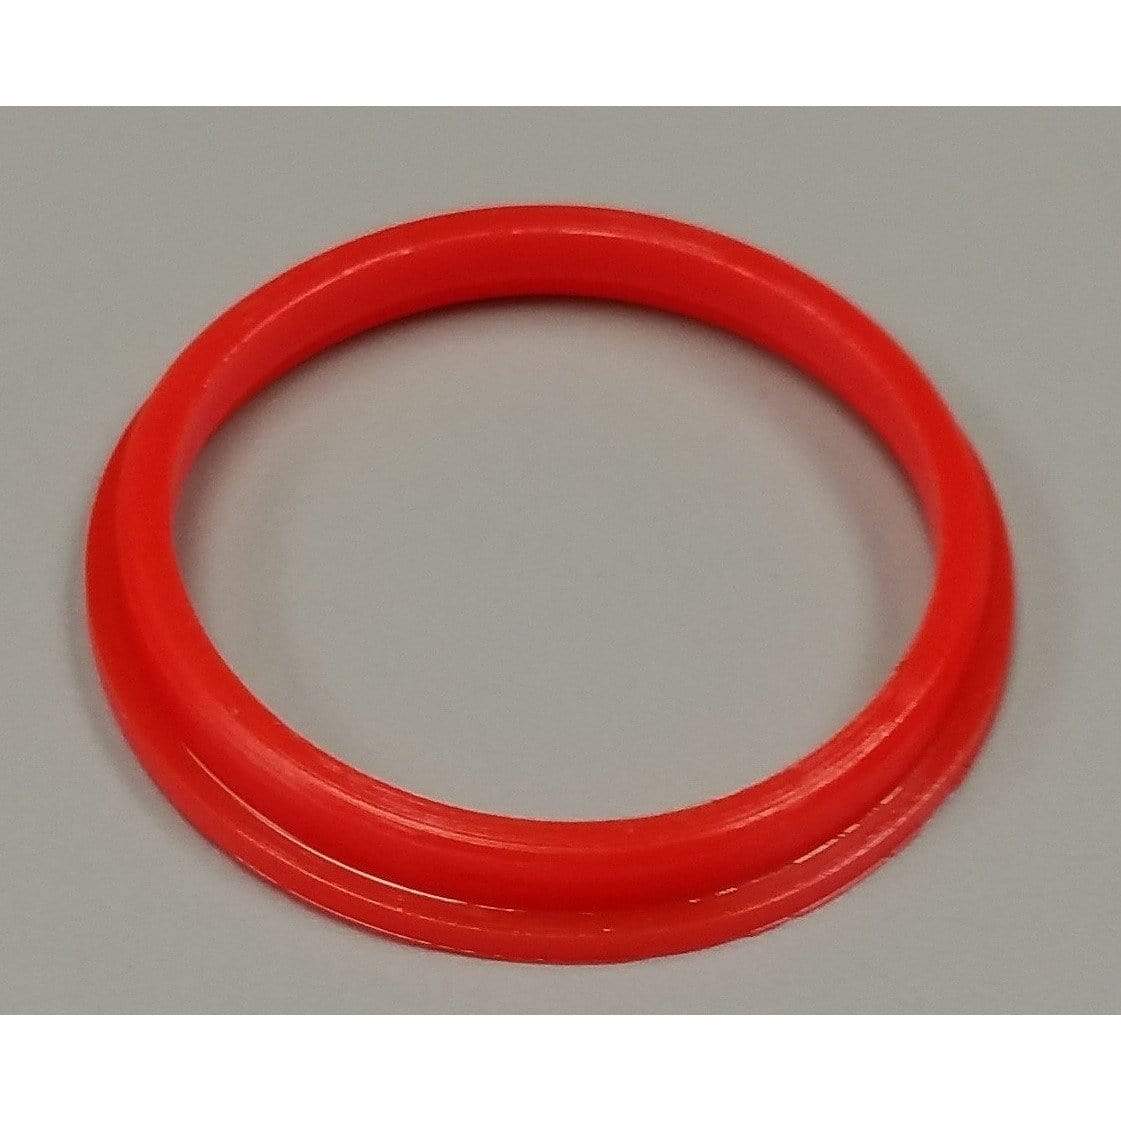 TFV4 Micro Replacement Seals BOTTOM Red Seal Seals/Oring's